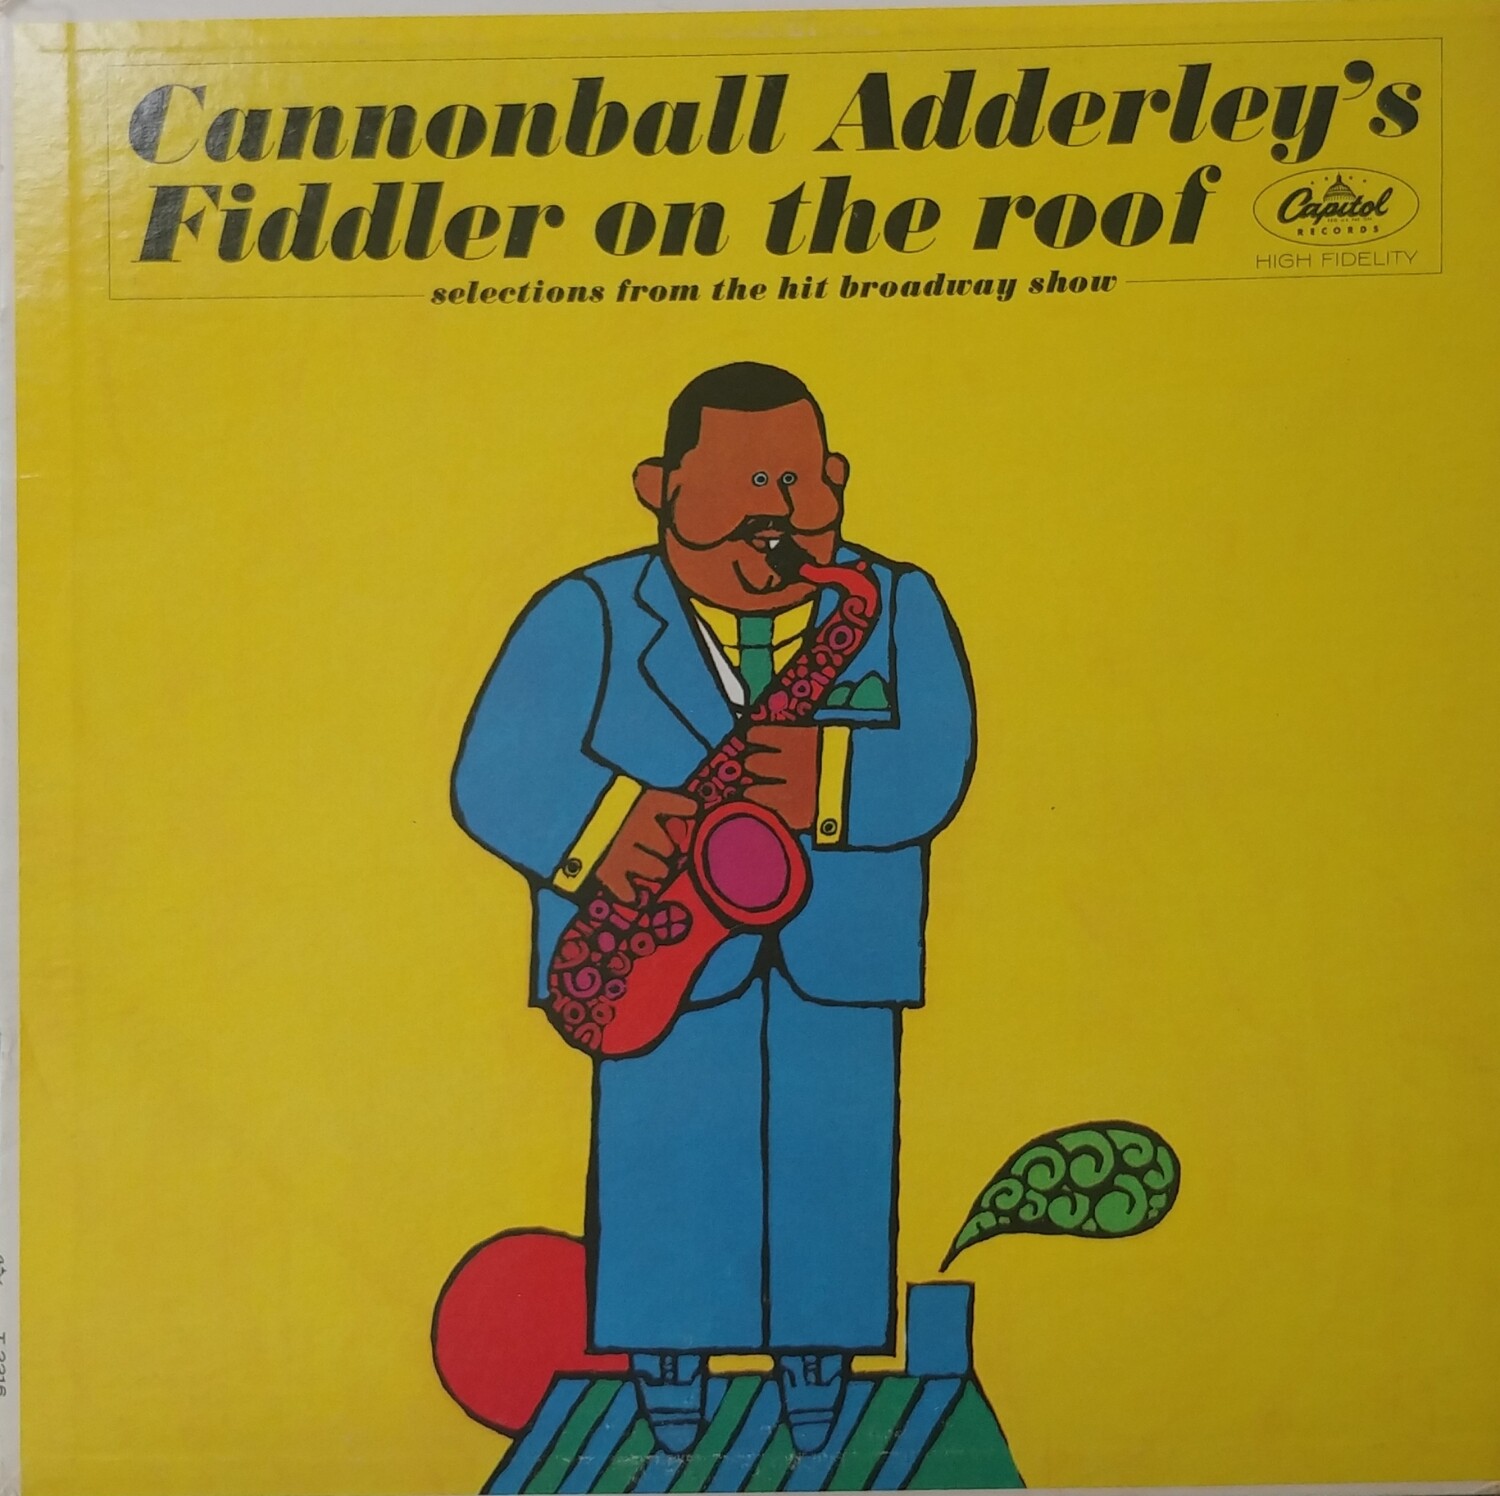 Cannonball Adderley - Fiddler on the roof